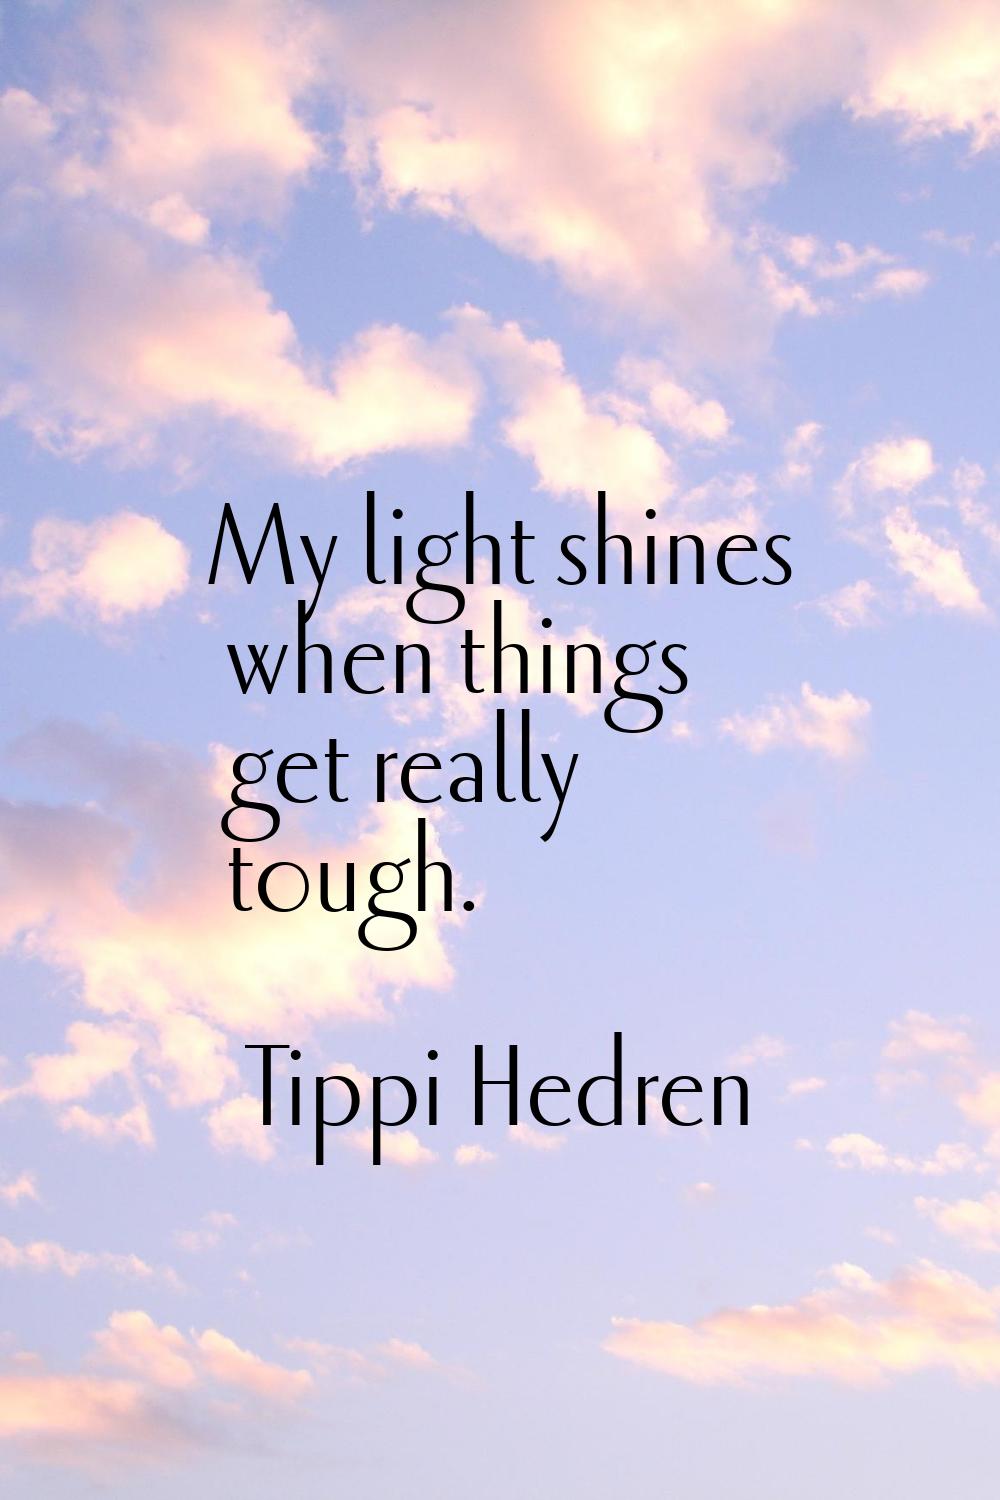 My light shines when things get really tough.